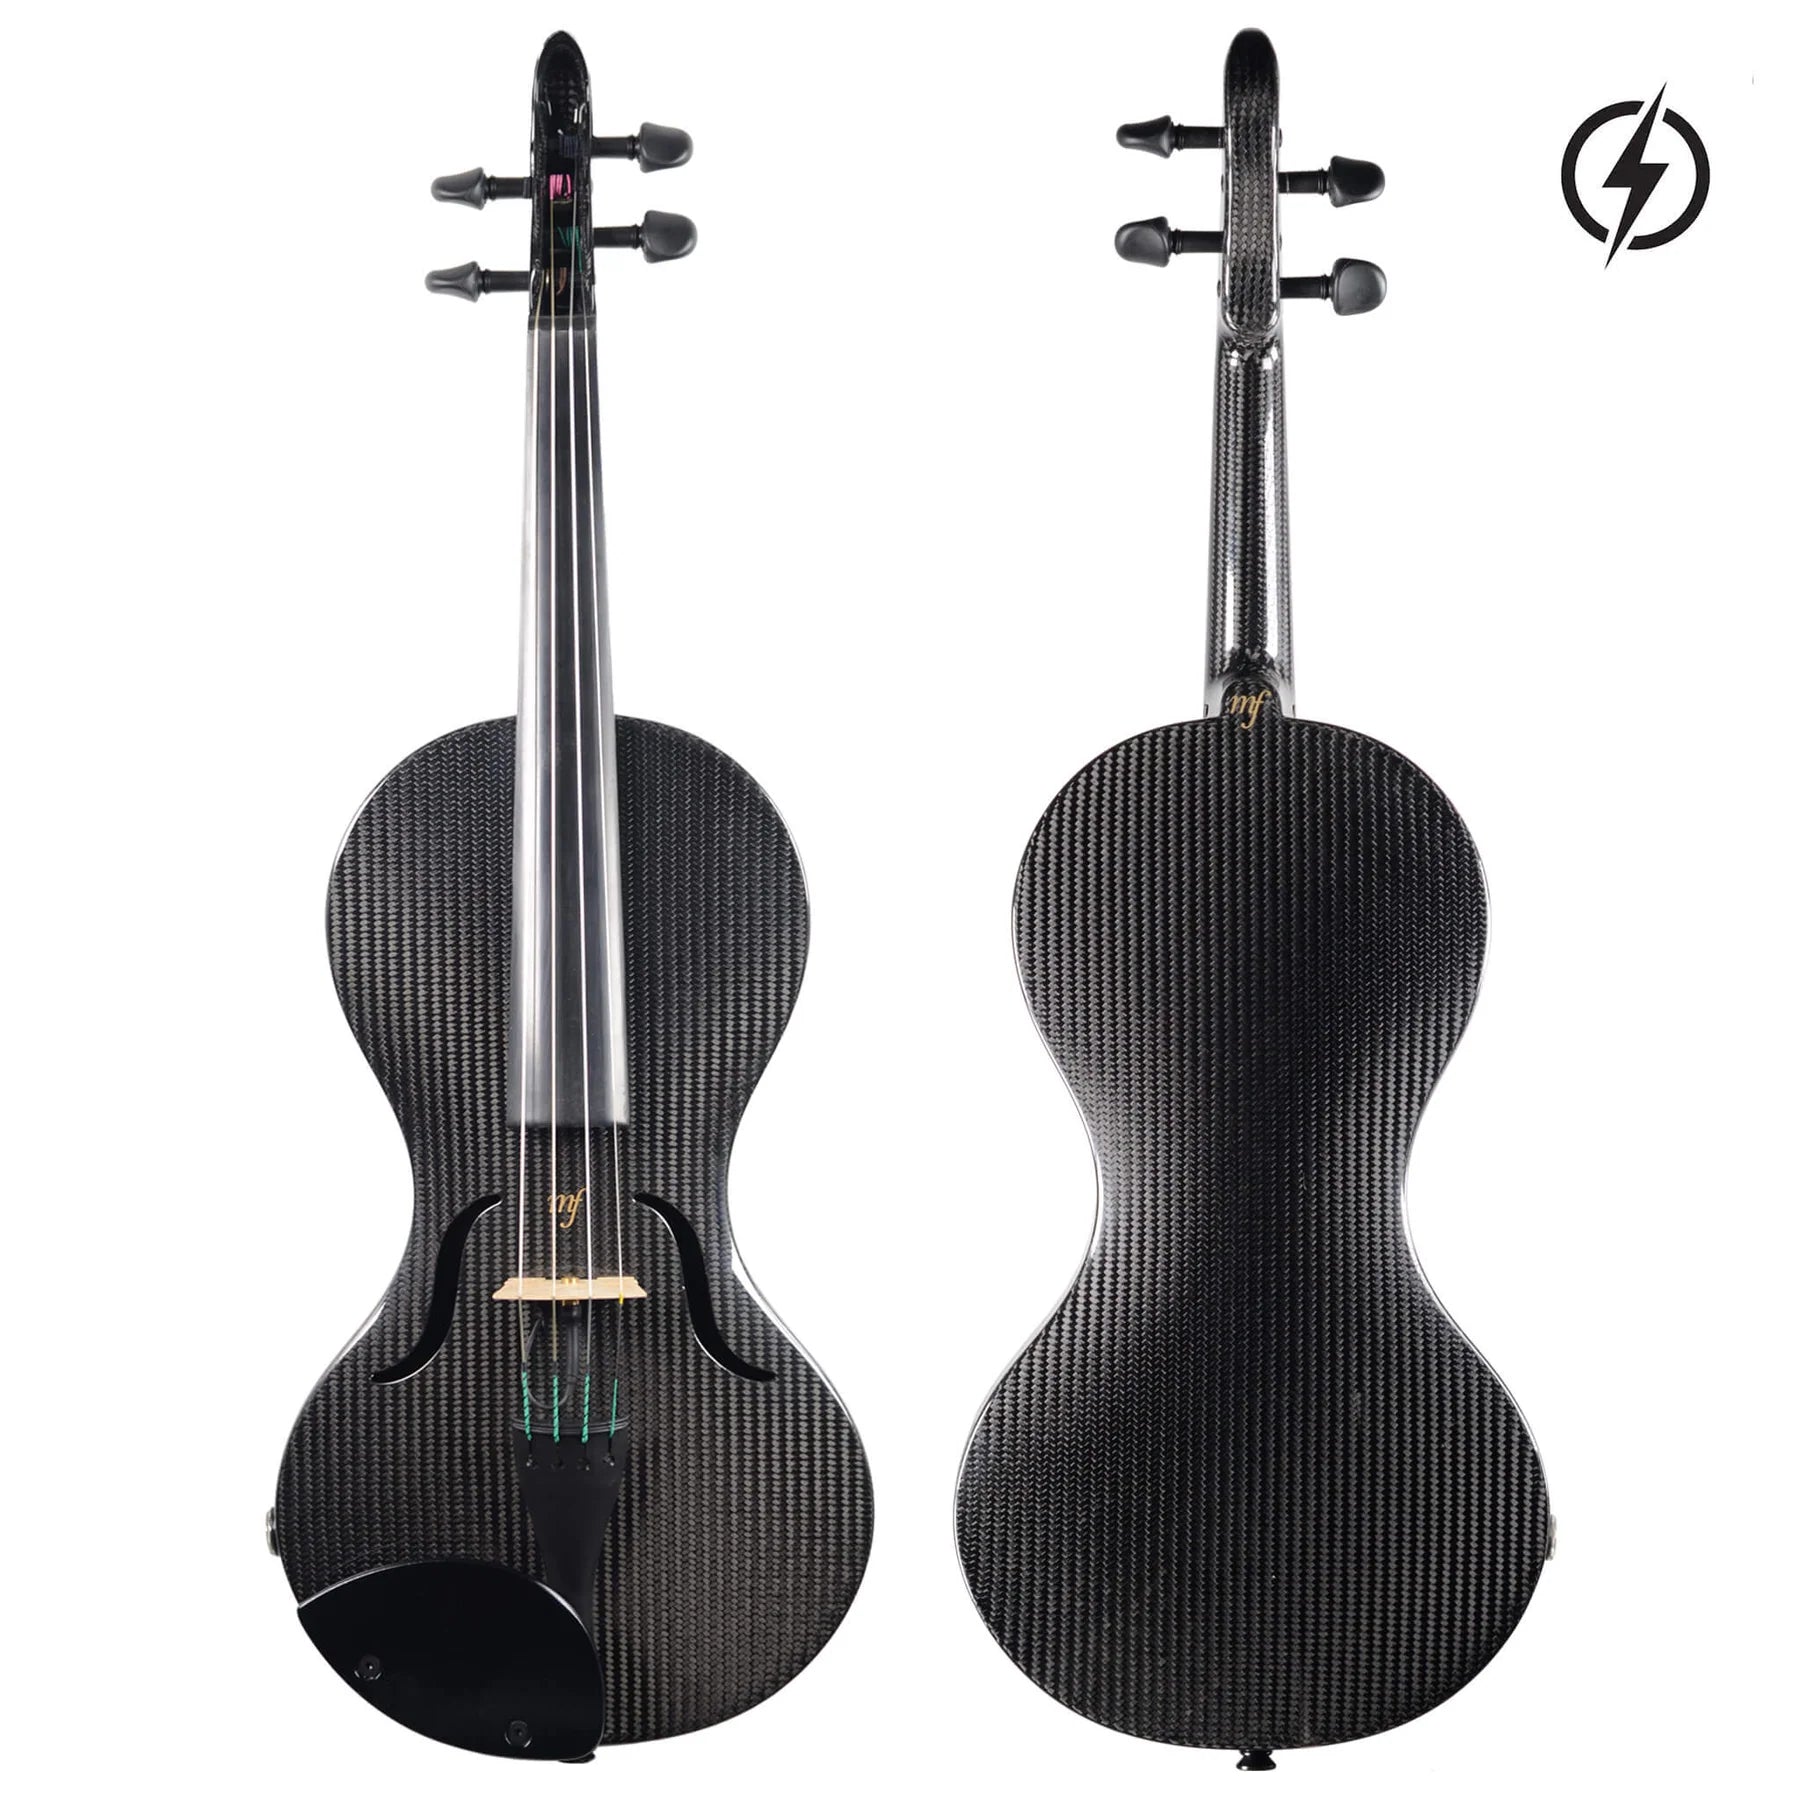 Mezzo-Forte Carbon Fiber Instrument Outfits & Add-Ons